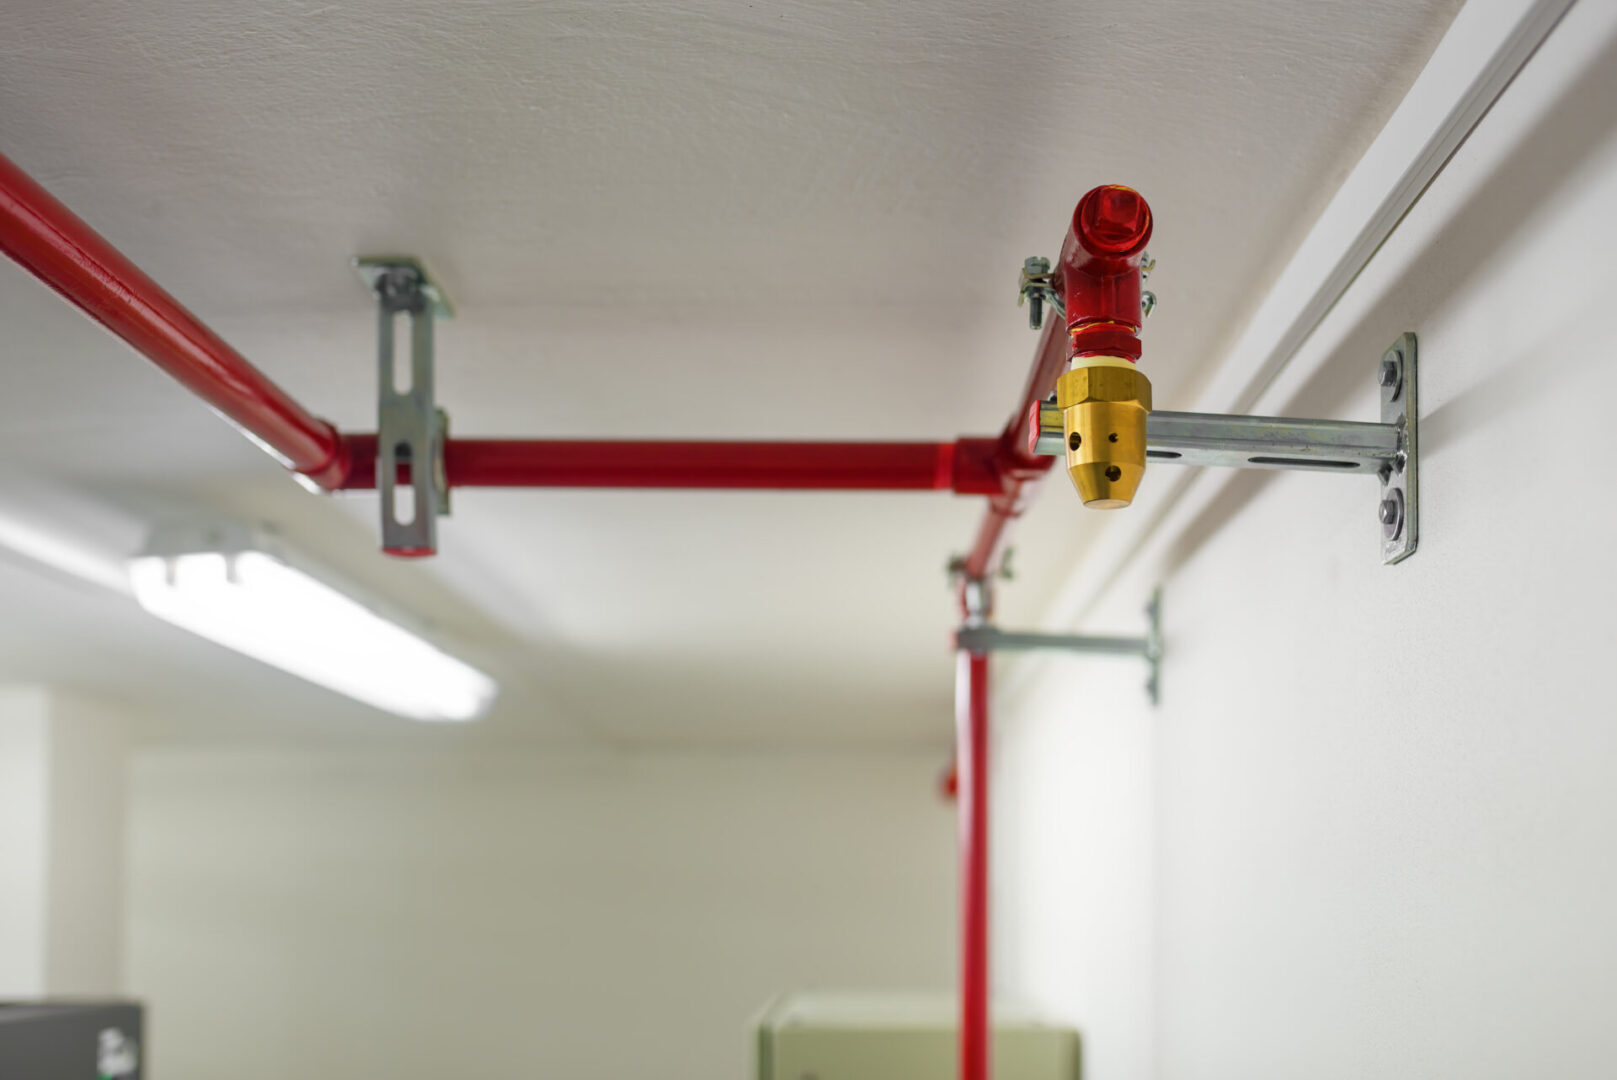 A red pipe hanging from the ceiling of a room.